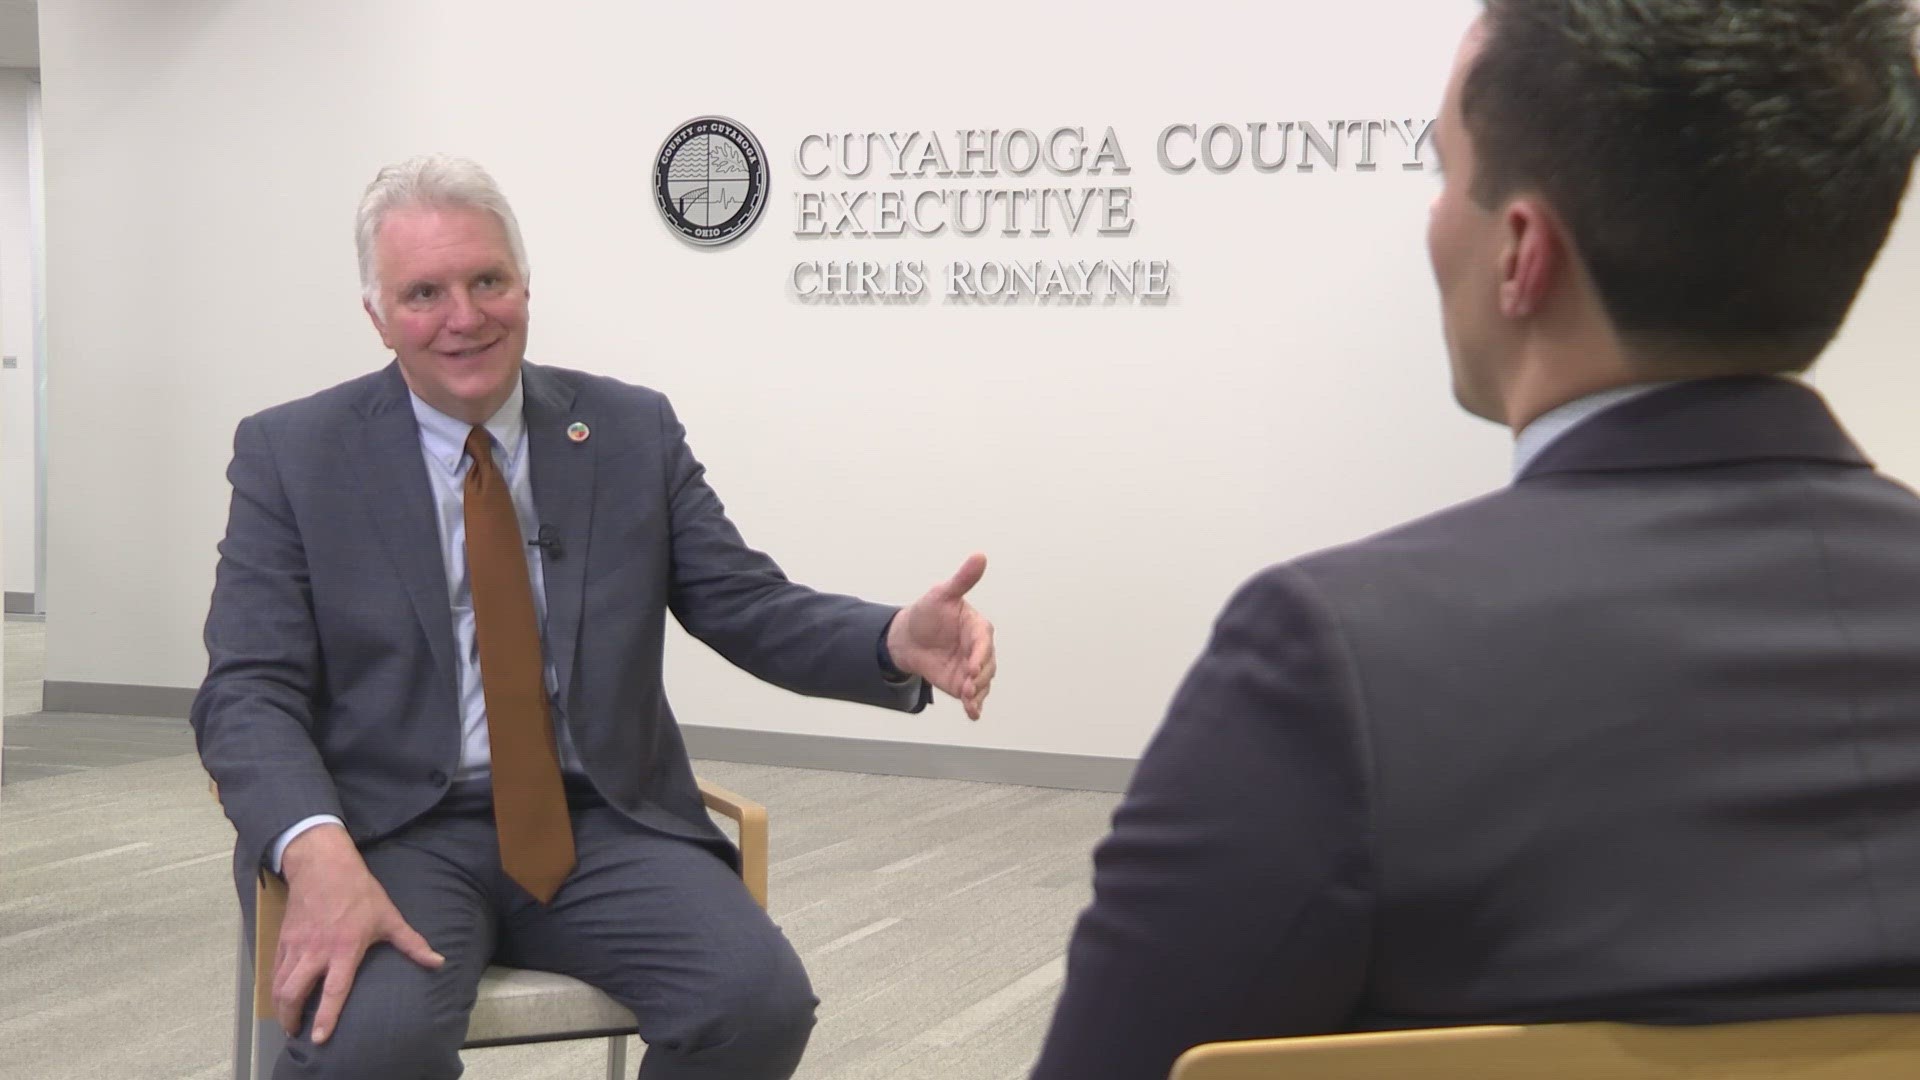 Cuyahoga County Executive Chris Ronayne sat down with Matt Rascon to discuss his first year in office.